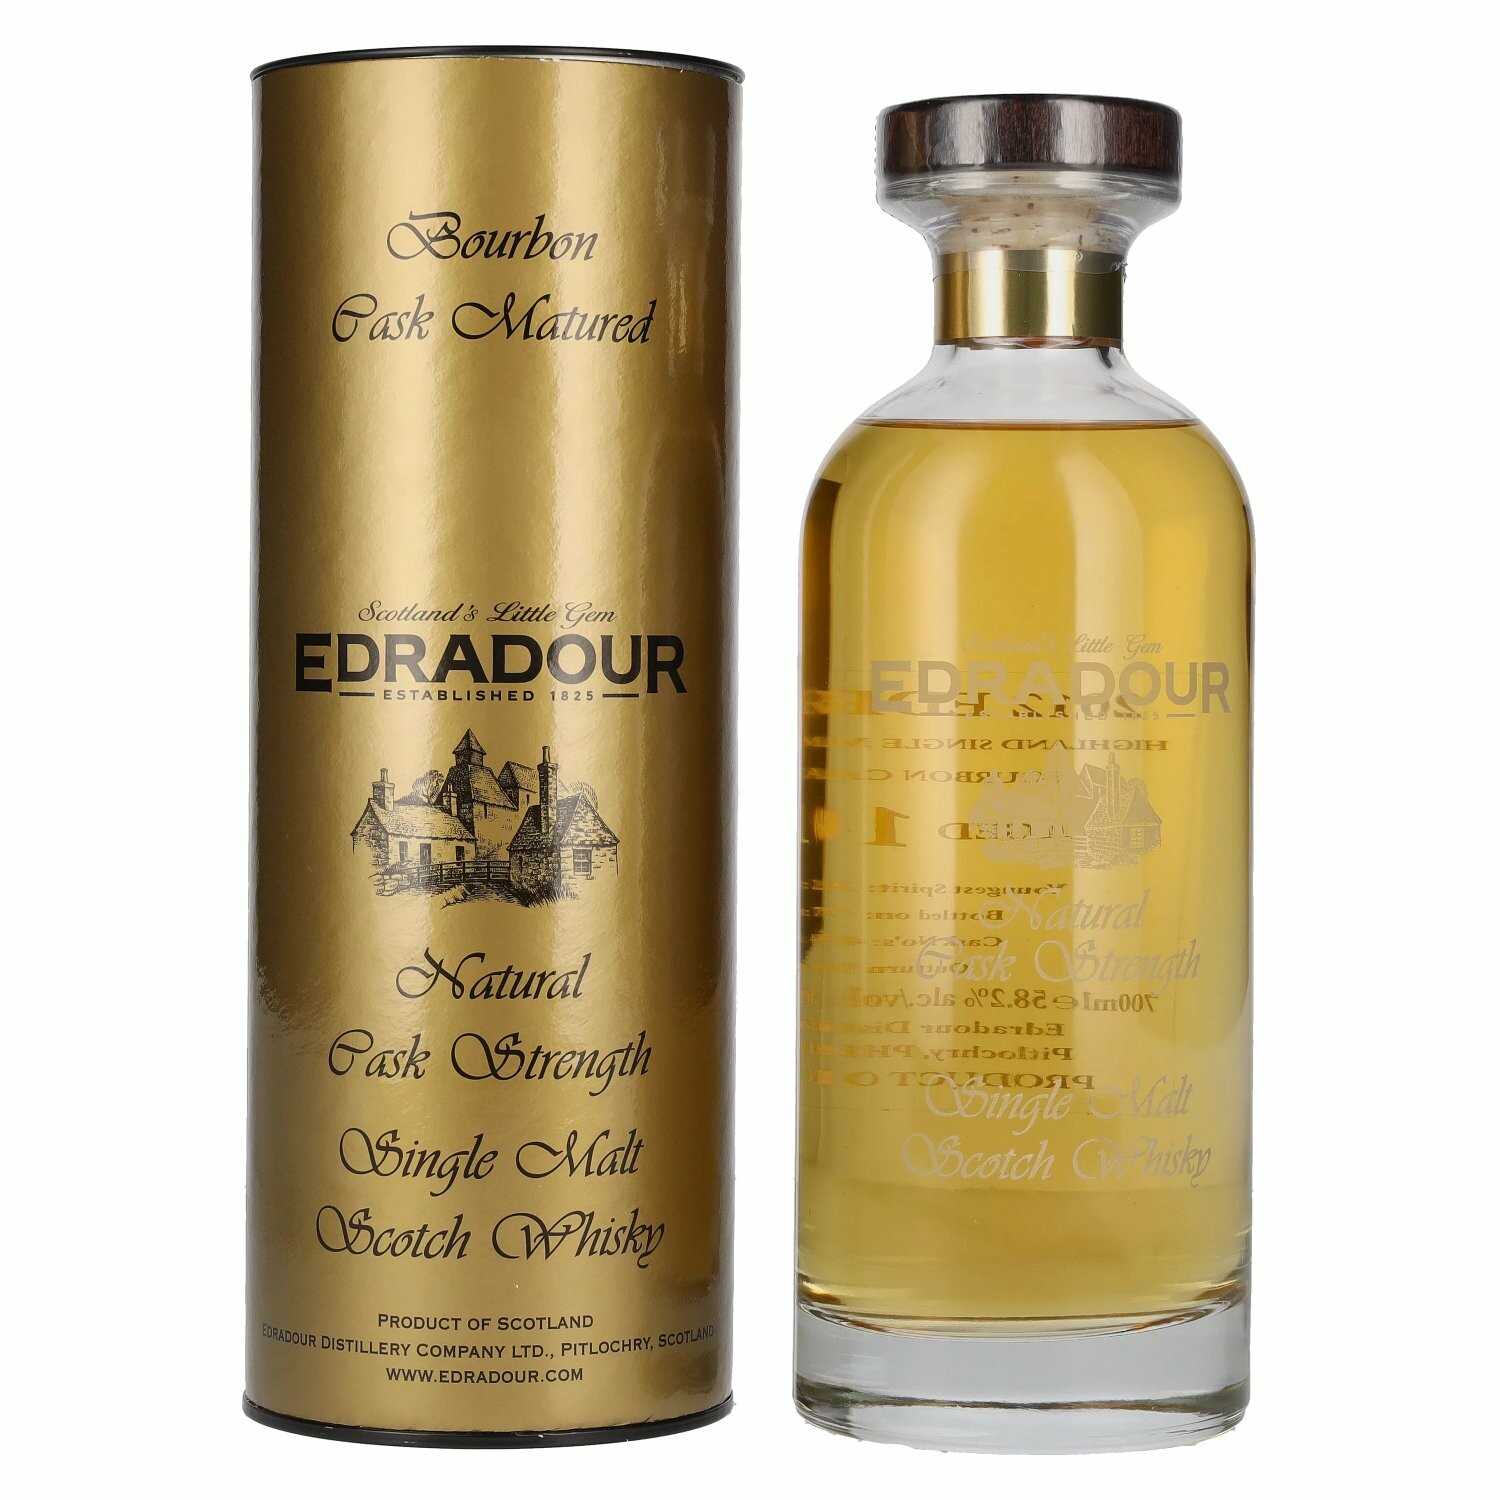 Edradour 10 Years Old Bourbon Cask Vintage 2012 58,2% Vol. 0,7l in Giftbox